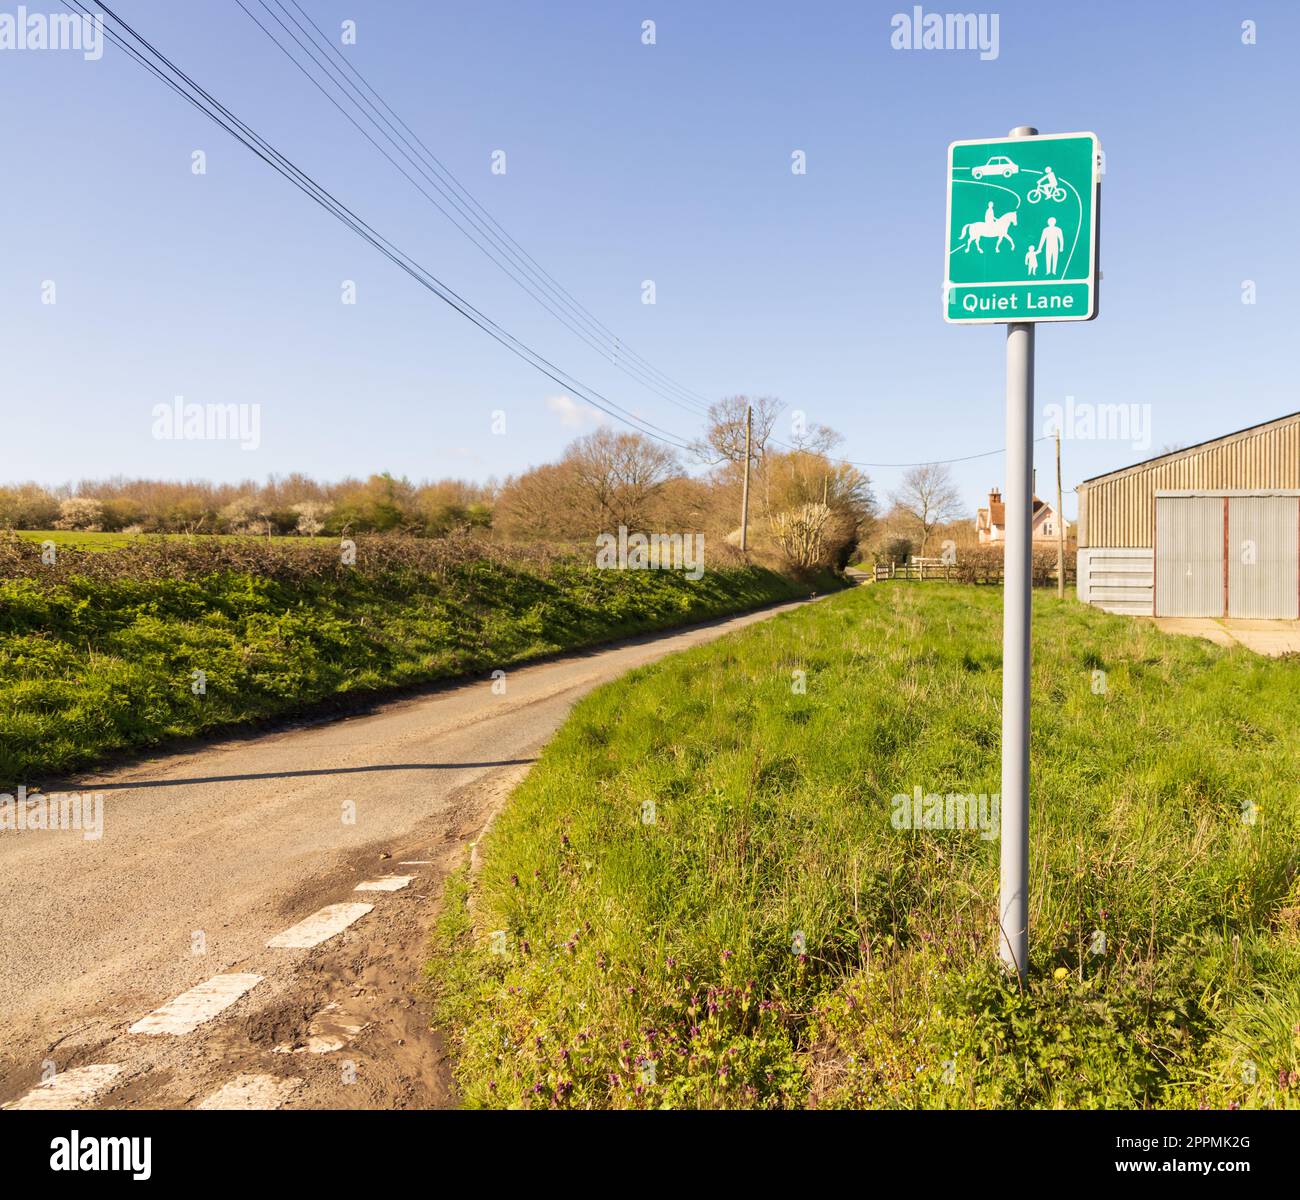 A Quiet Lane sign on single-track road where visitors and locals can enjoy the natural surroundings where less than 1000 cars a day use that road. Stock Photo